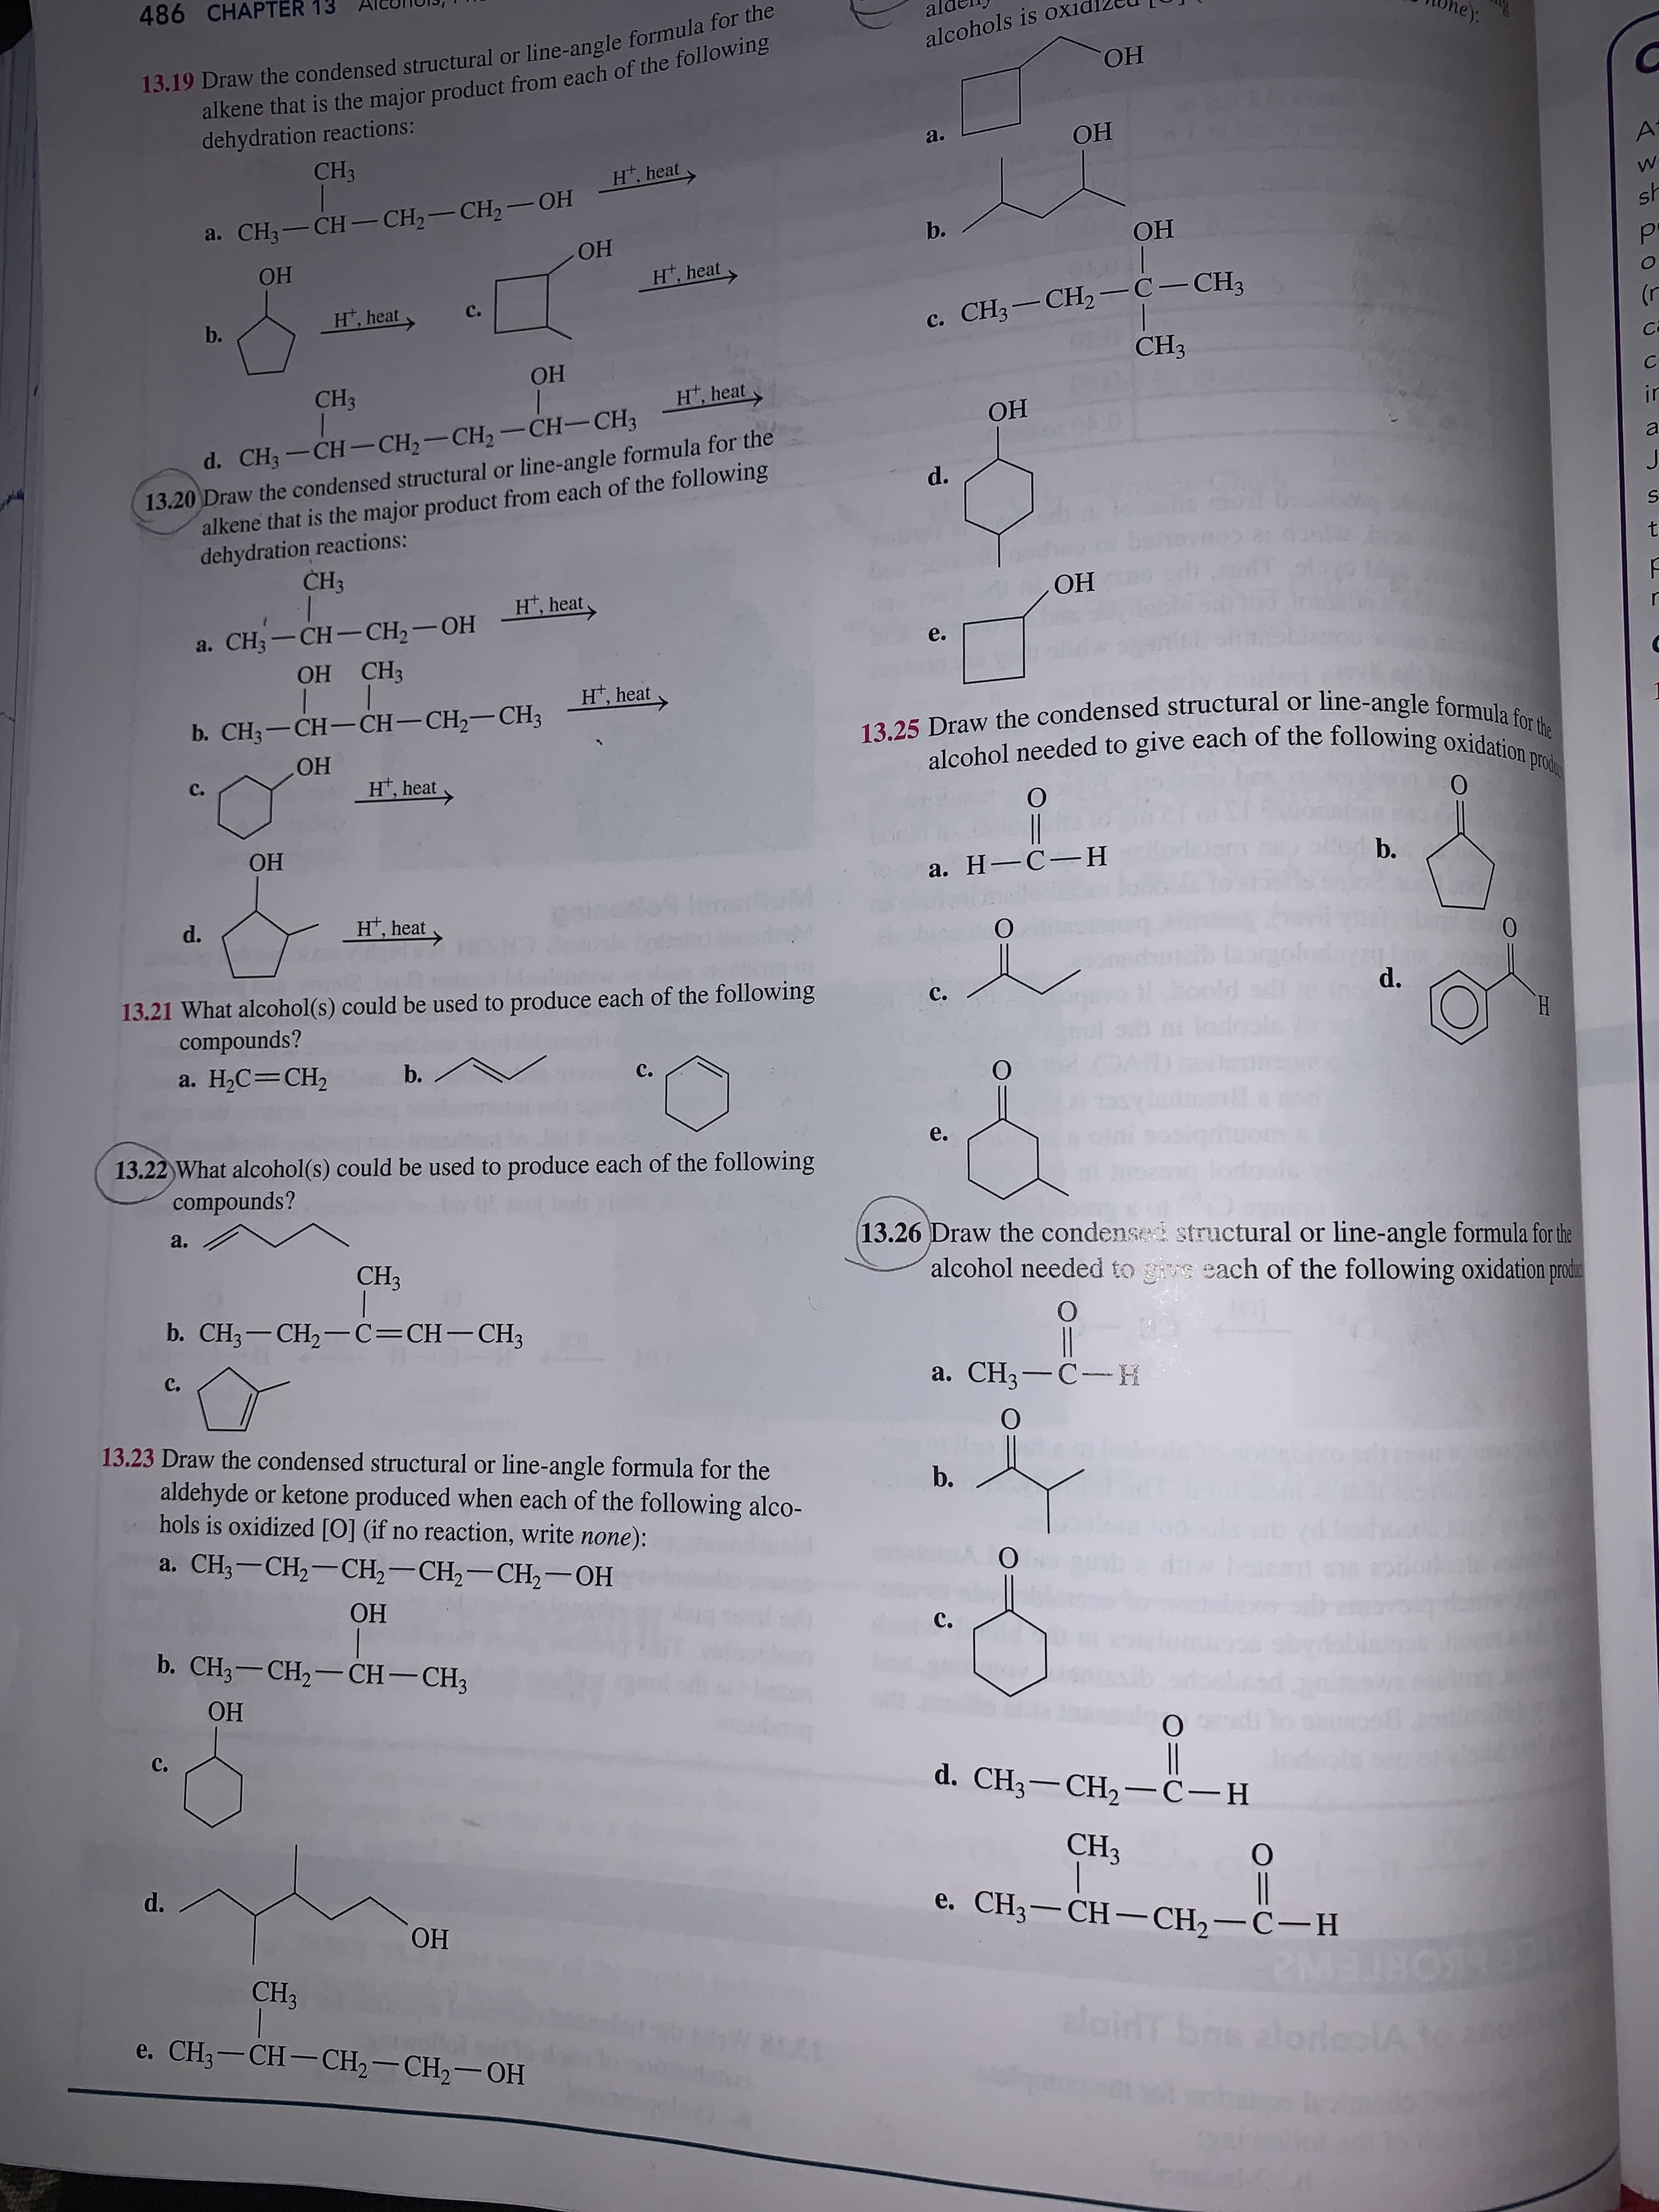 d. CH3-CH-CH2-CH2-CH-CH3
O Draw the condensed structural or line-angle formula for the
alkene that is the major product from each of the following
dehydration reactions:
CH3
H, heat.
a. CH; — CH-СНH, — ОН
OH CH3
H, heat
b. CH3-CH-CH-CH,-CH3
OH
C.
H*, heat
ОН
1.
H*, heat
produce each of the following
